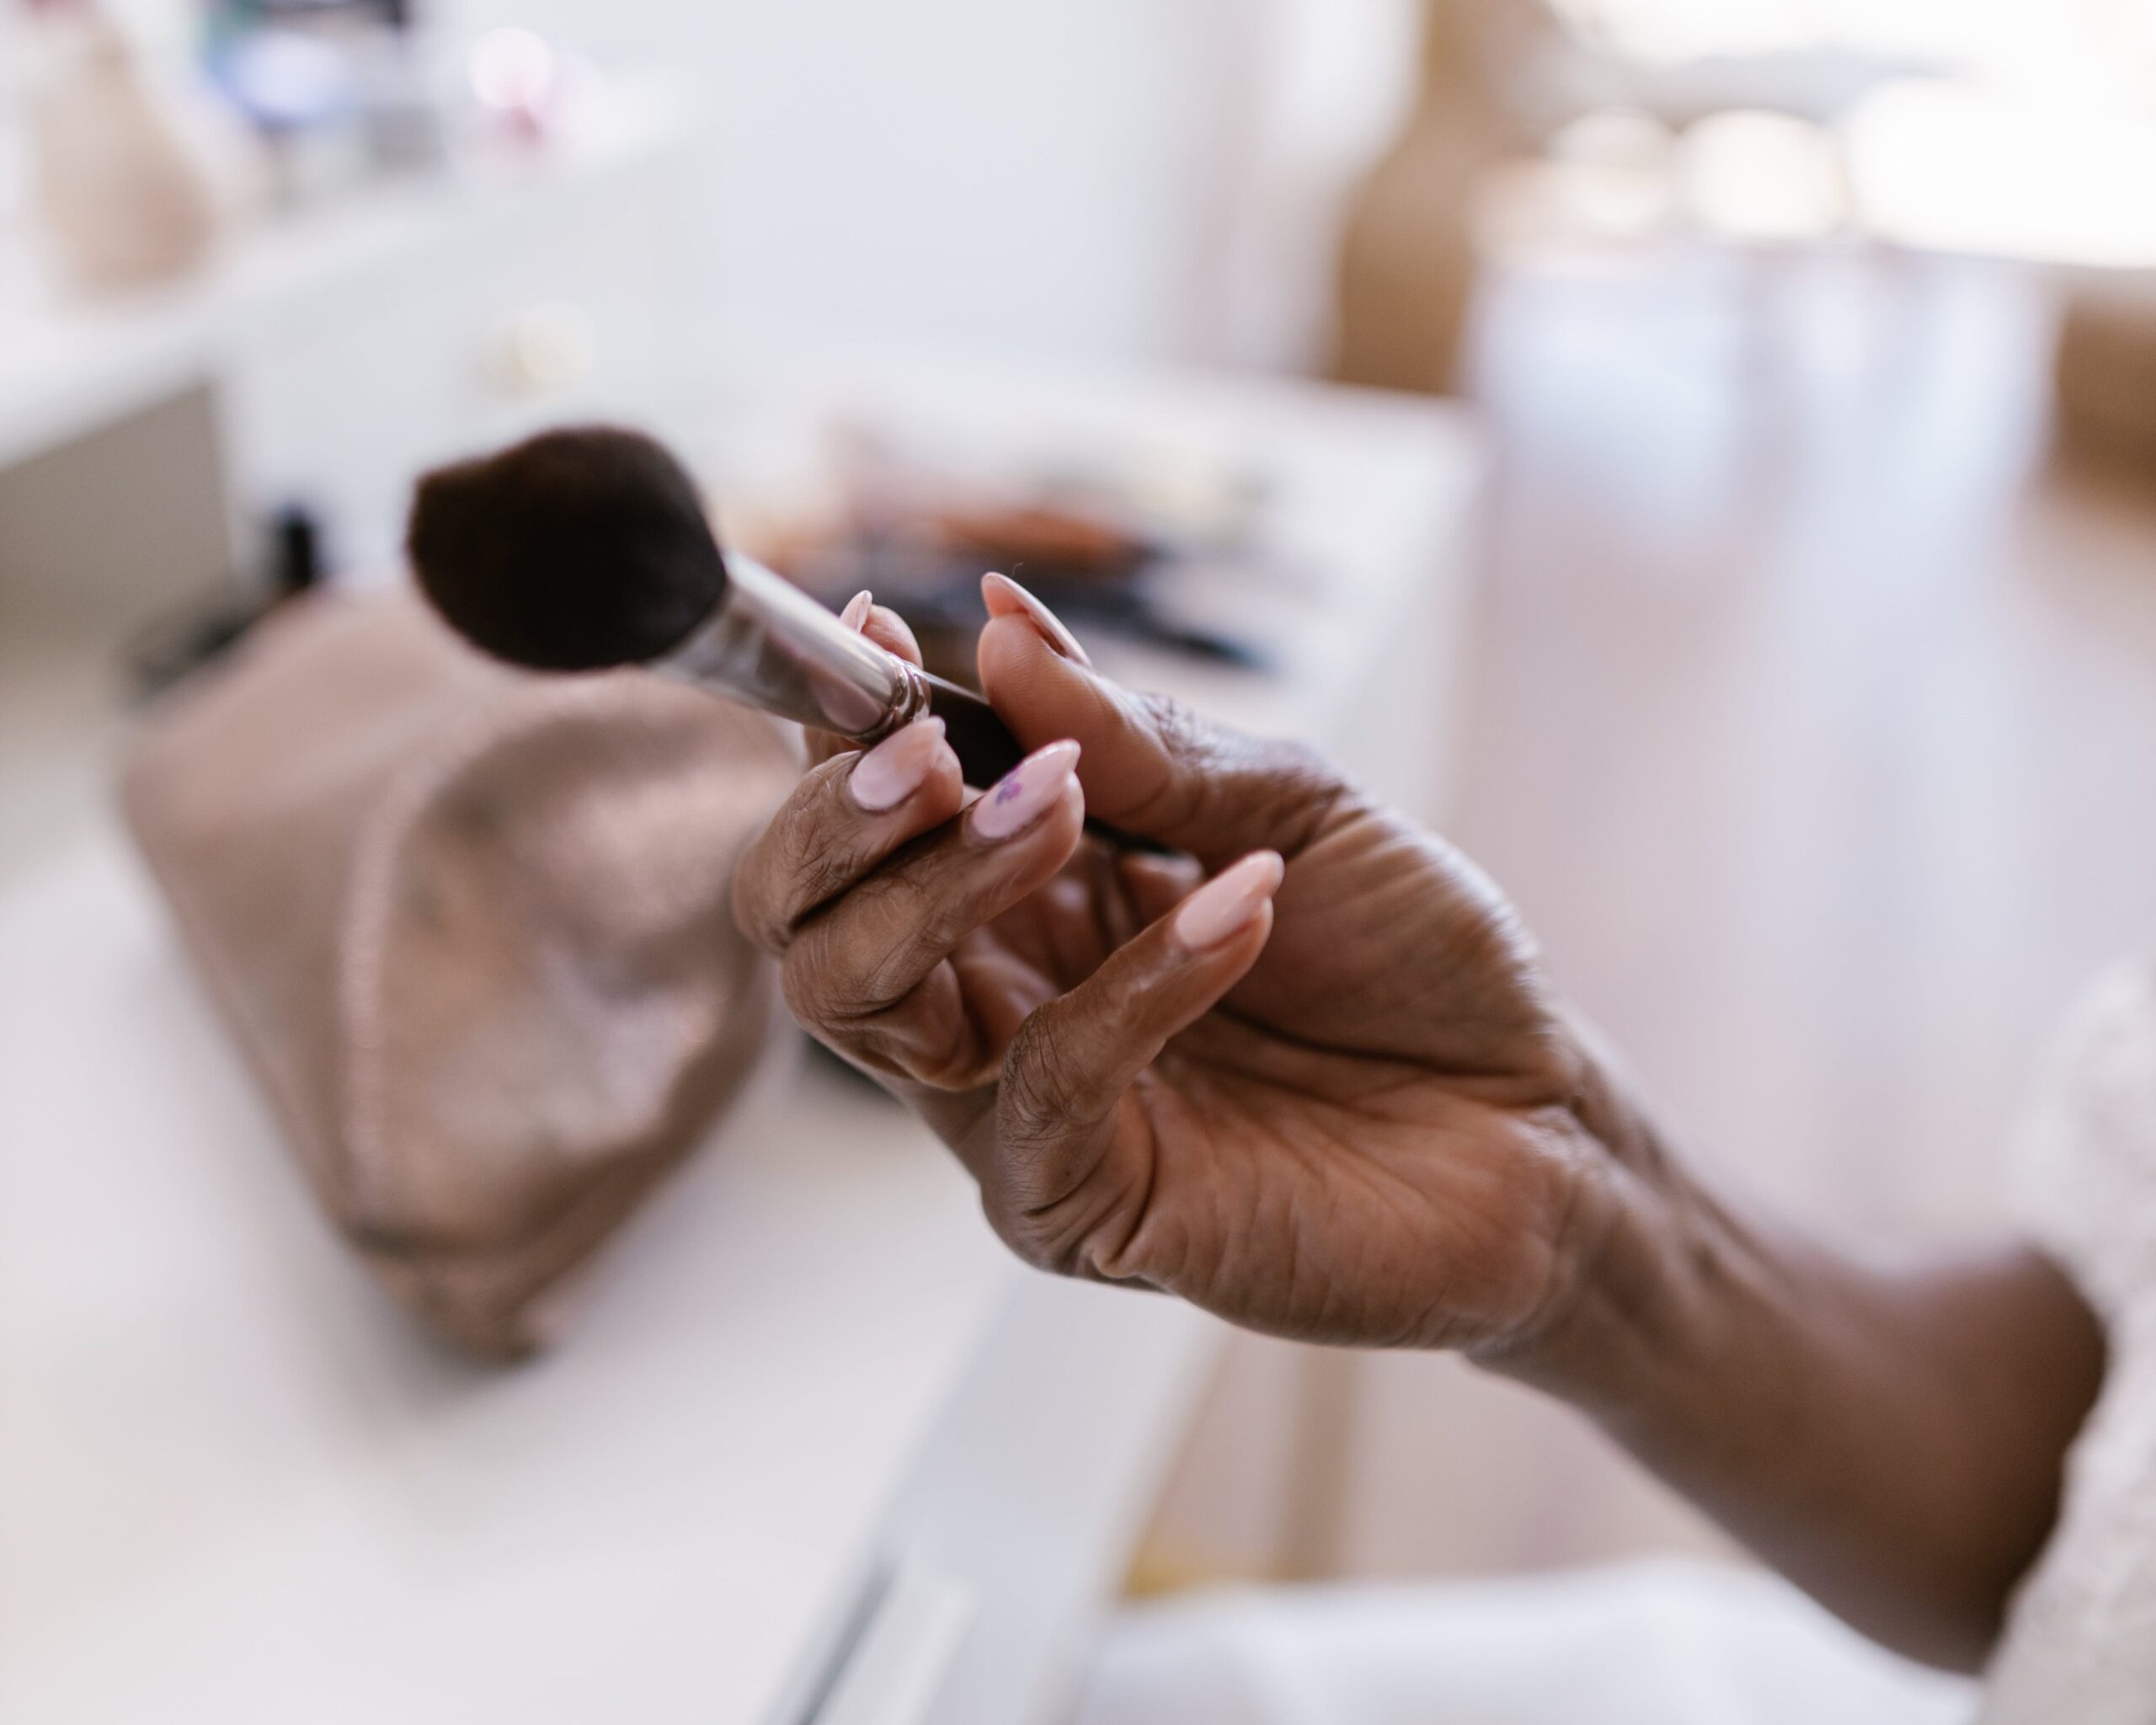 Best makeup brush cleaner that deep cleanses your beauty tools